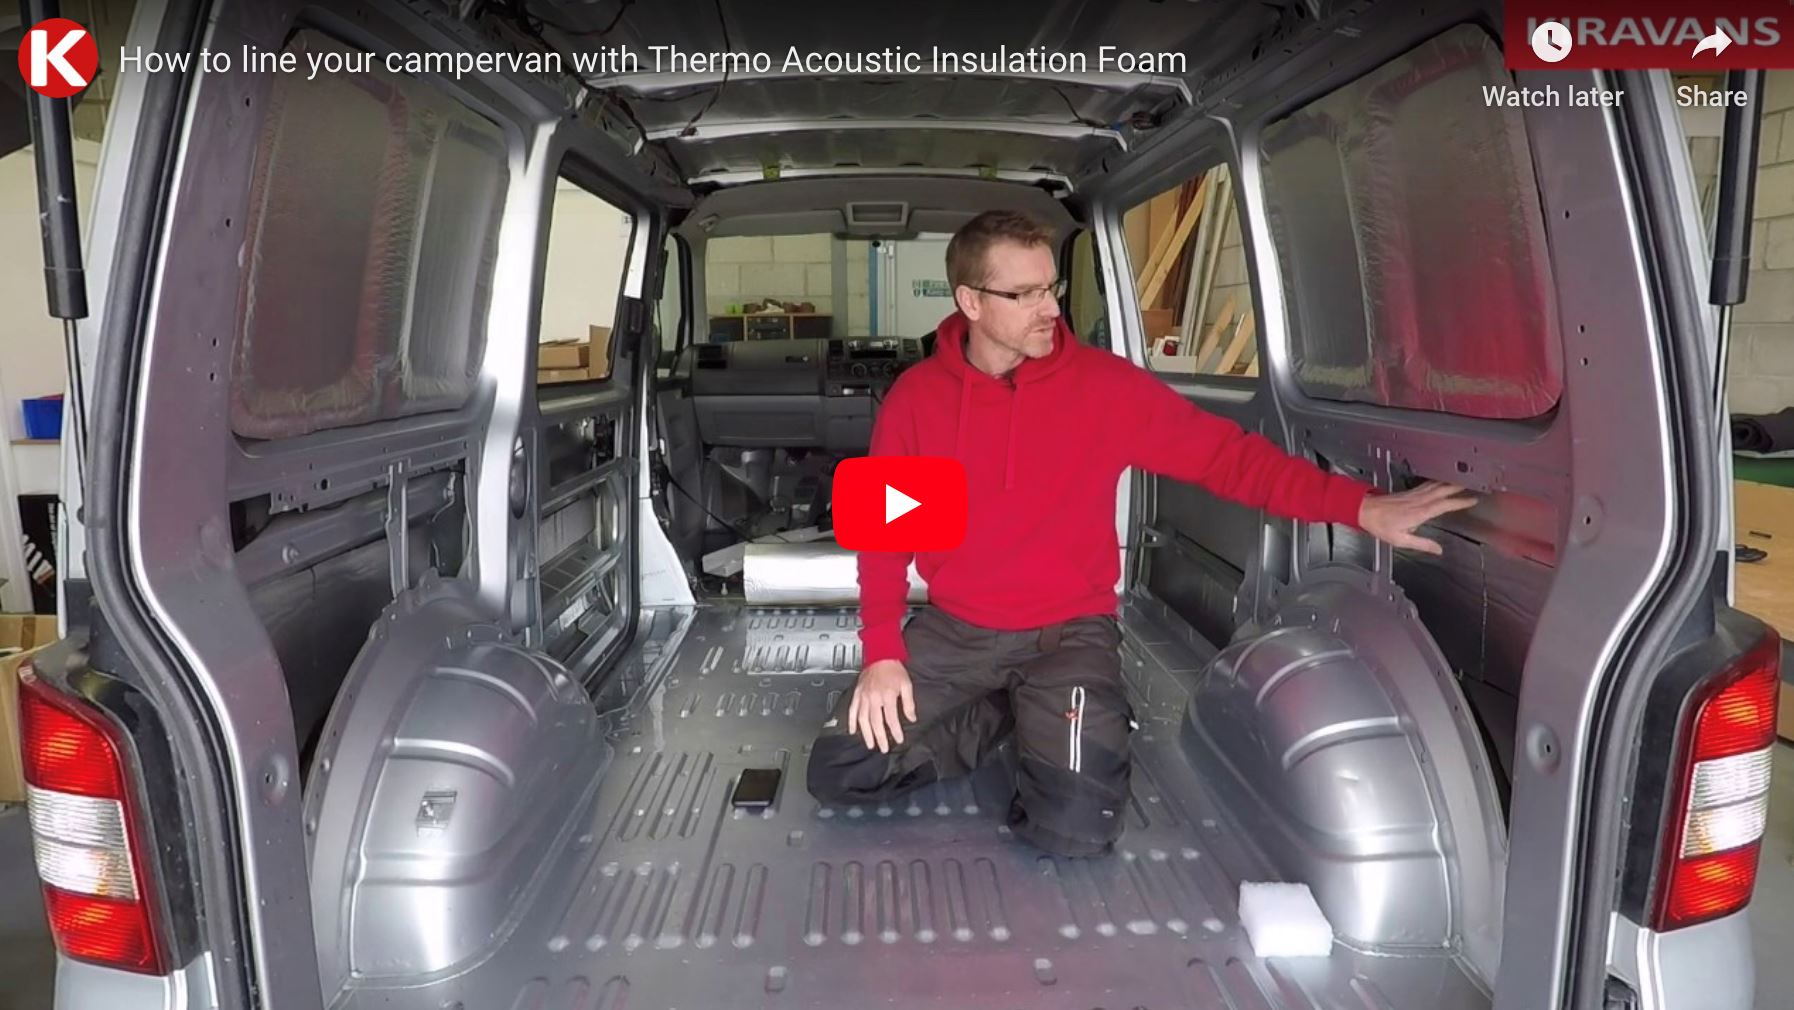 How to line your campervan with Thermo Acoustic Insulation Foam